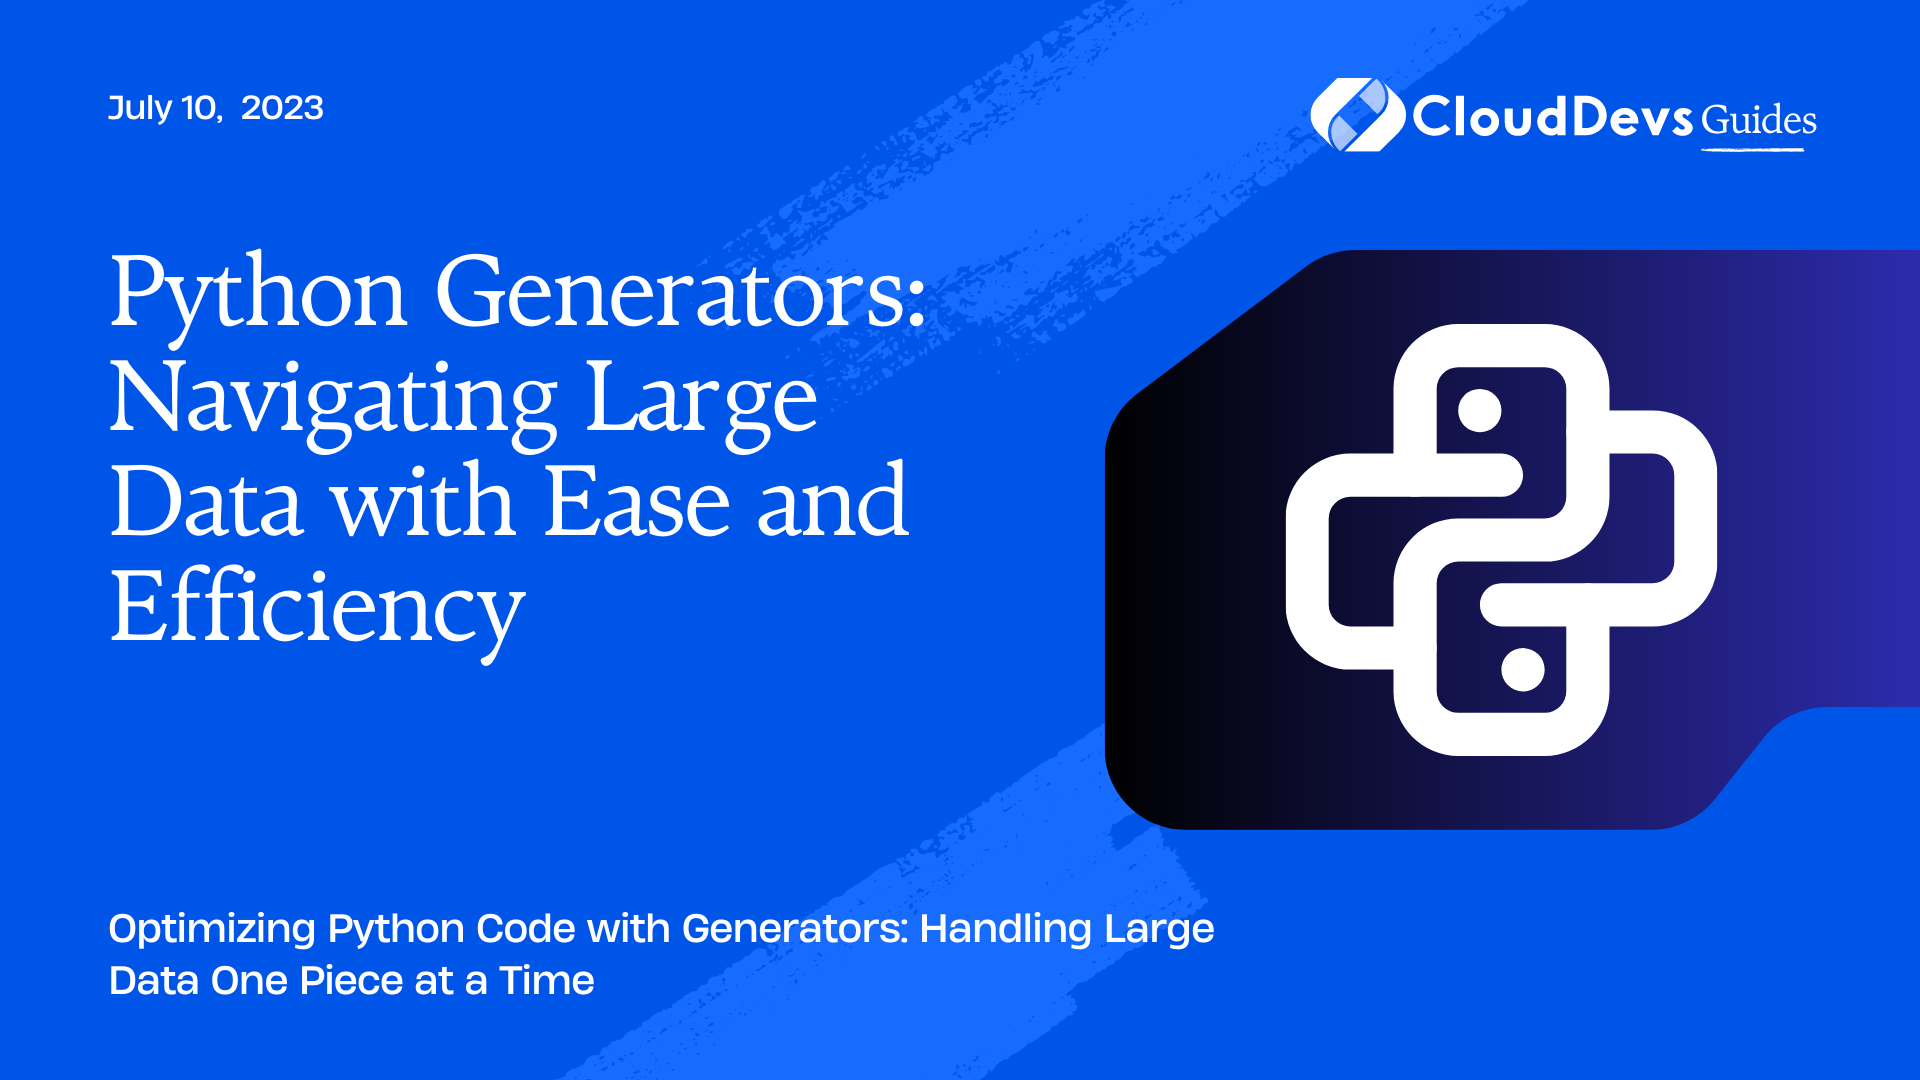 Python Generators: Navigating Large Data with Ease and Efficiency